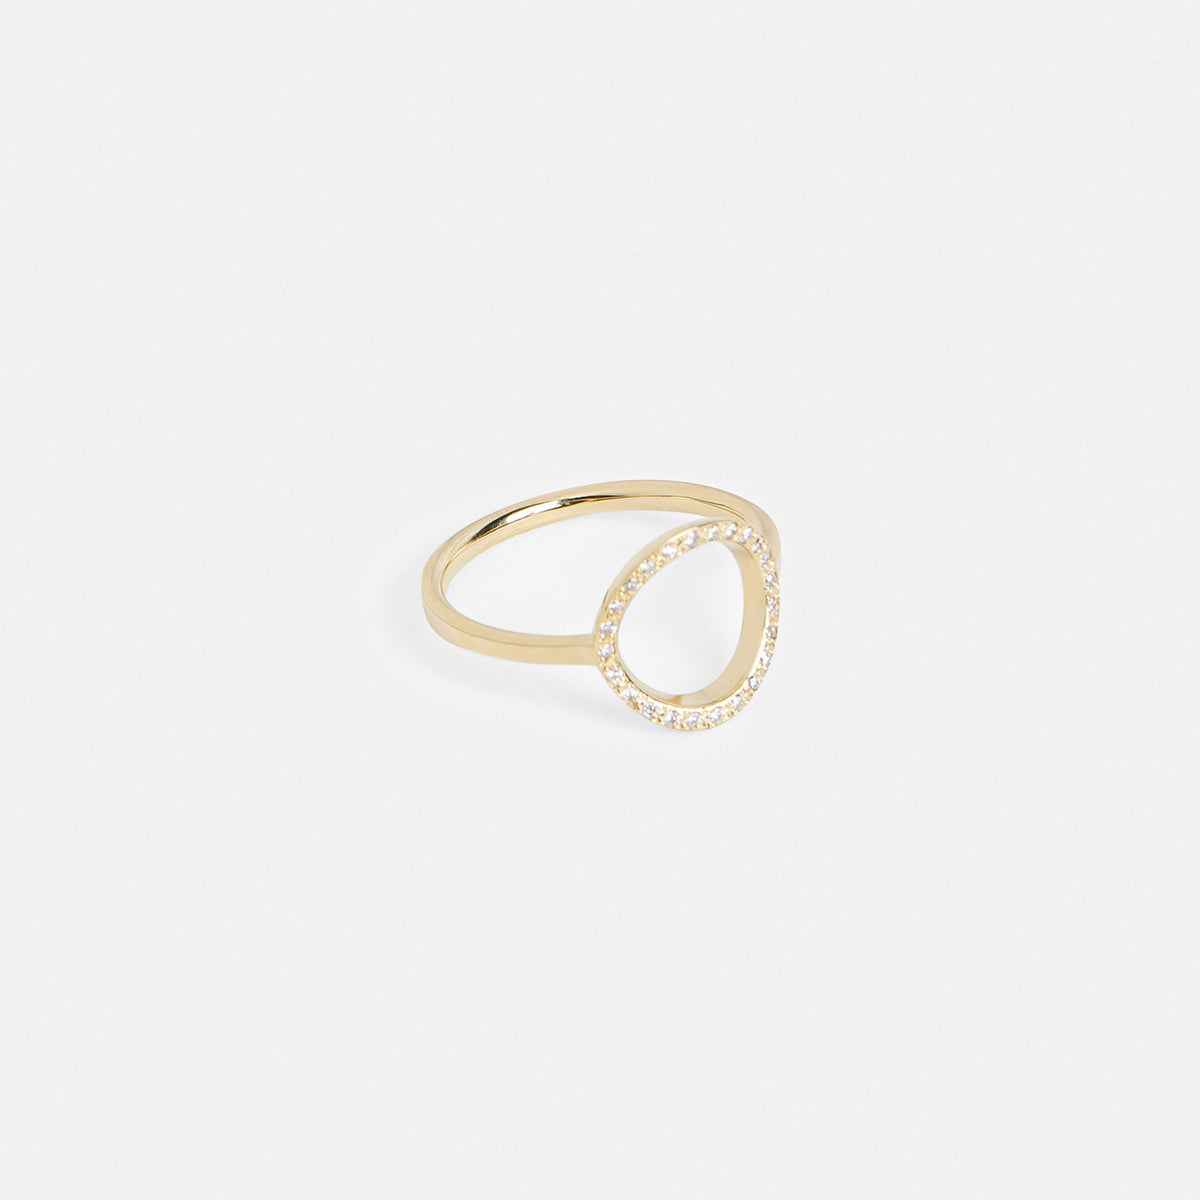 Nida Unique Ring in 14k Gold set with White Diamonds by SHW Fine Jewelry